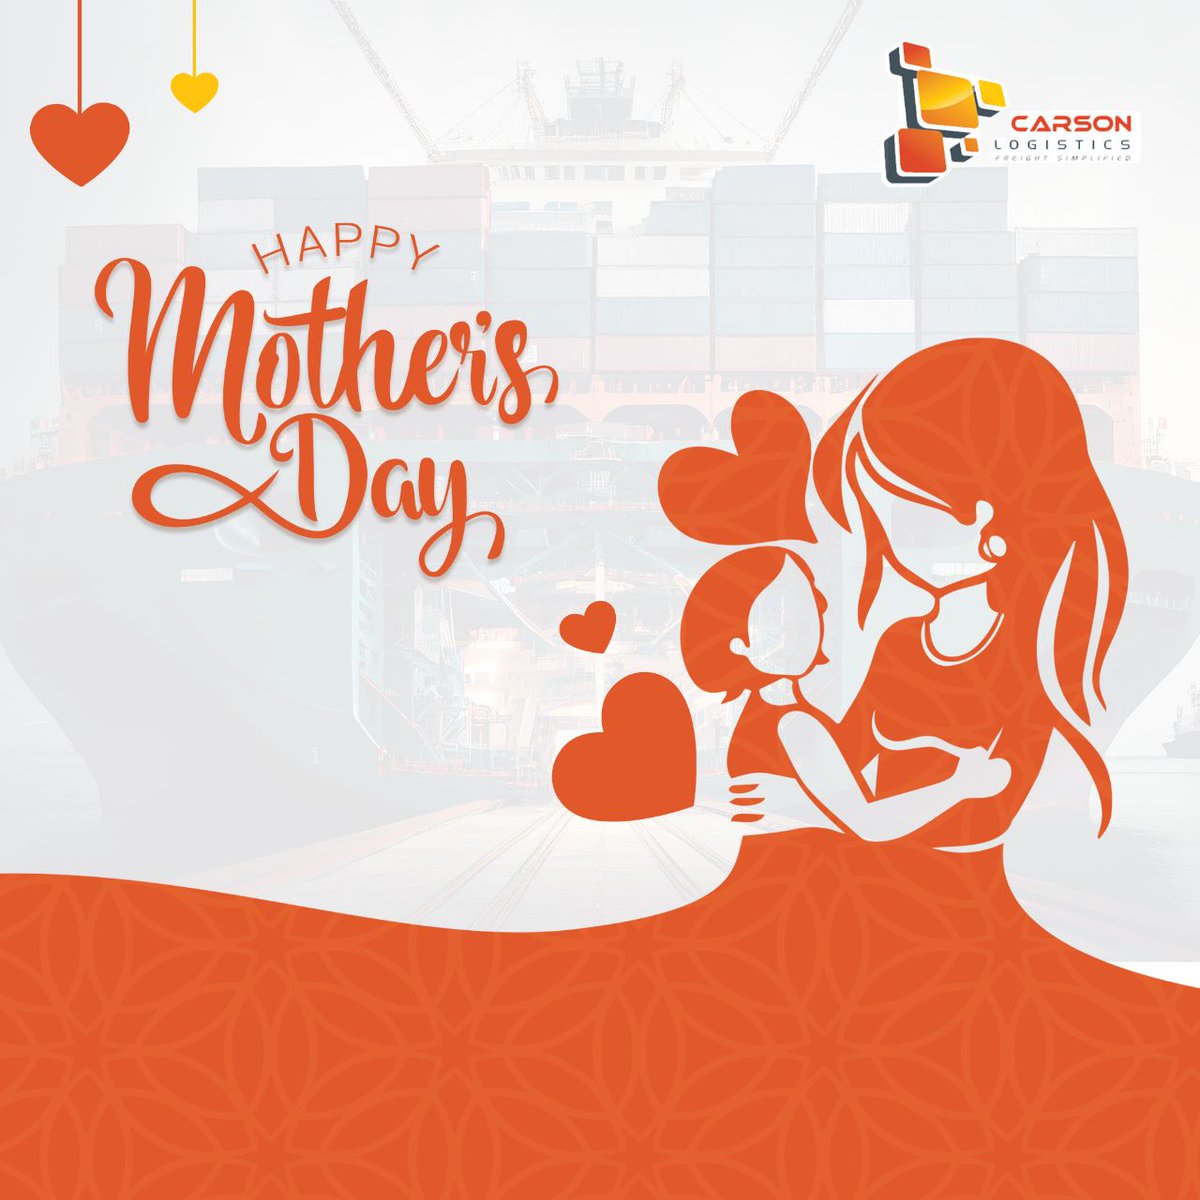 Your inexhaustible source of Unconditional Love, Support, Joy, and Care is also…

A refined artist
A devout fitness Yogi
A passionate musician
An adventure freak…

Carson wishes all Moms A Very Happy Mother’s Day!

#happymothersday #mothersdaygift #motherlove #carsonlogistics